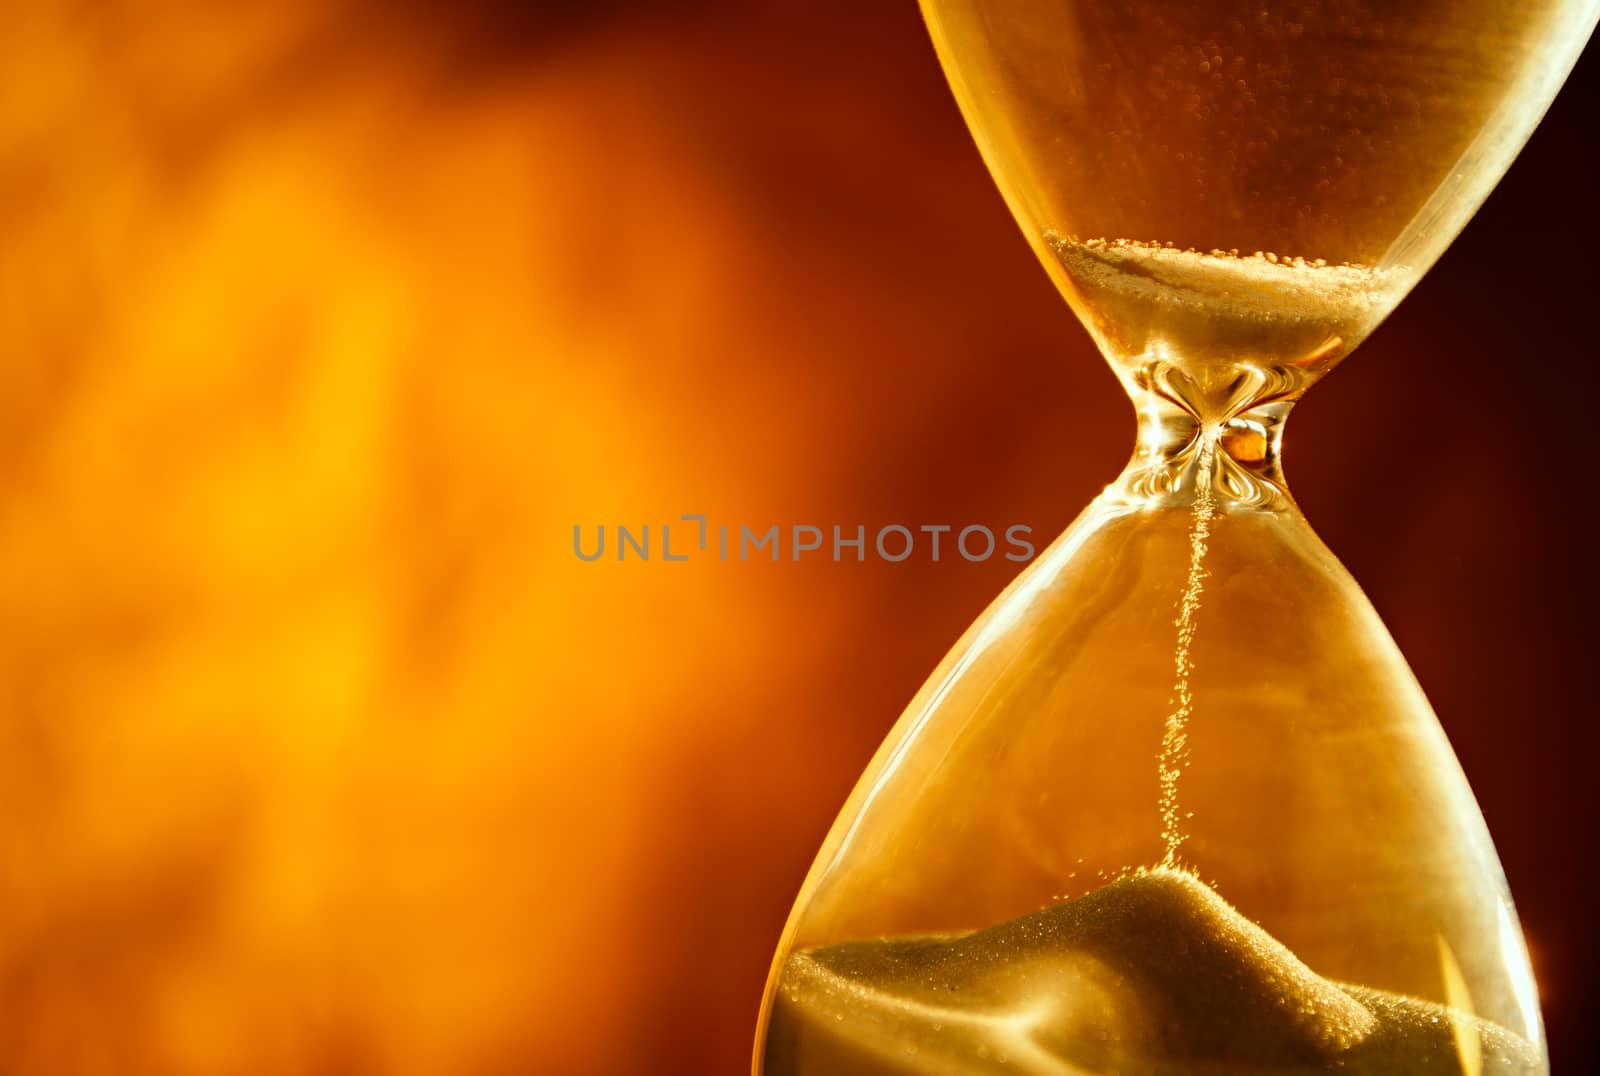 Sand passing through the glass bulbs of an hourglass measuring the passing time as it counts down to a deadline or closure on a yellow background with copyspace